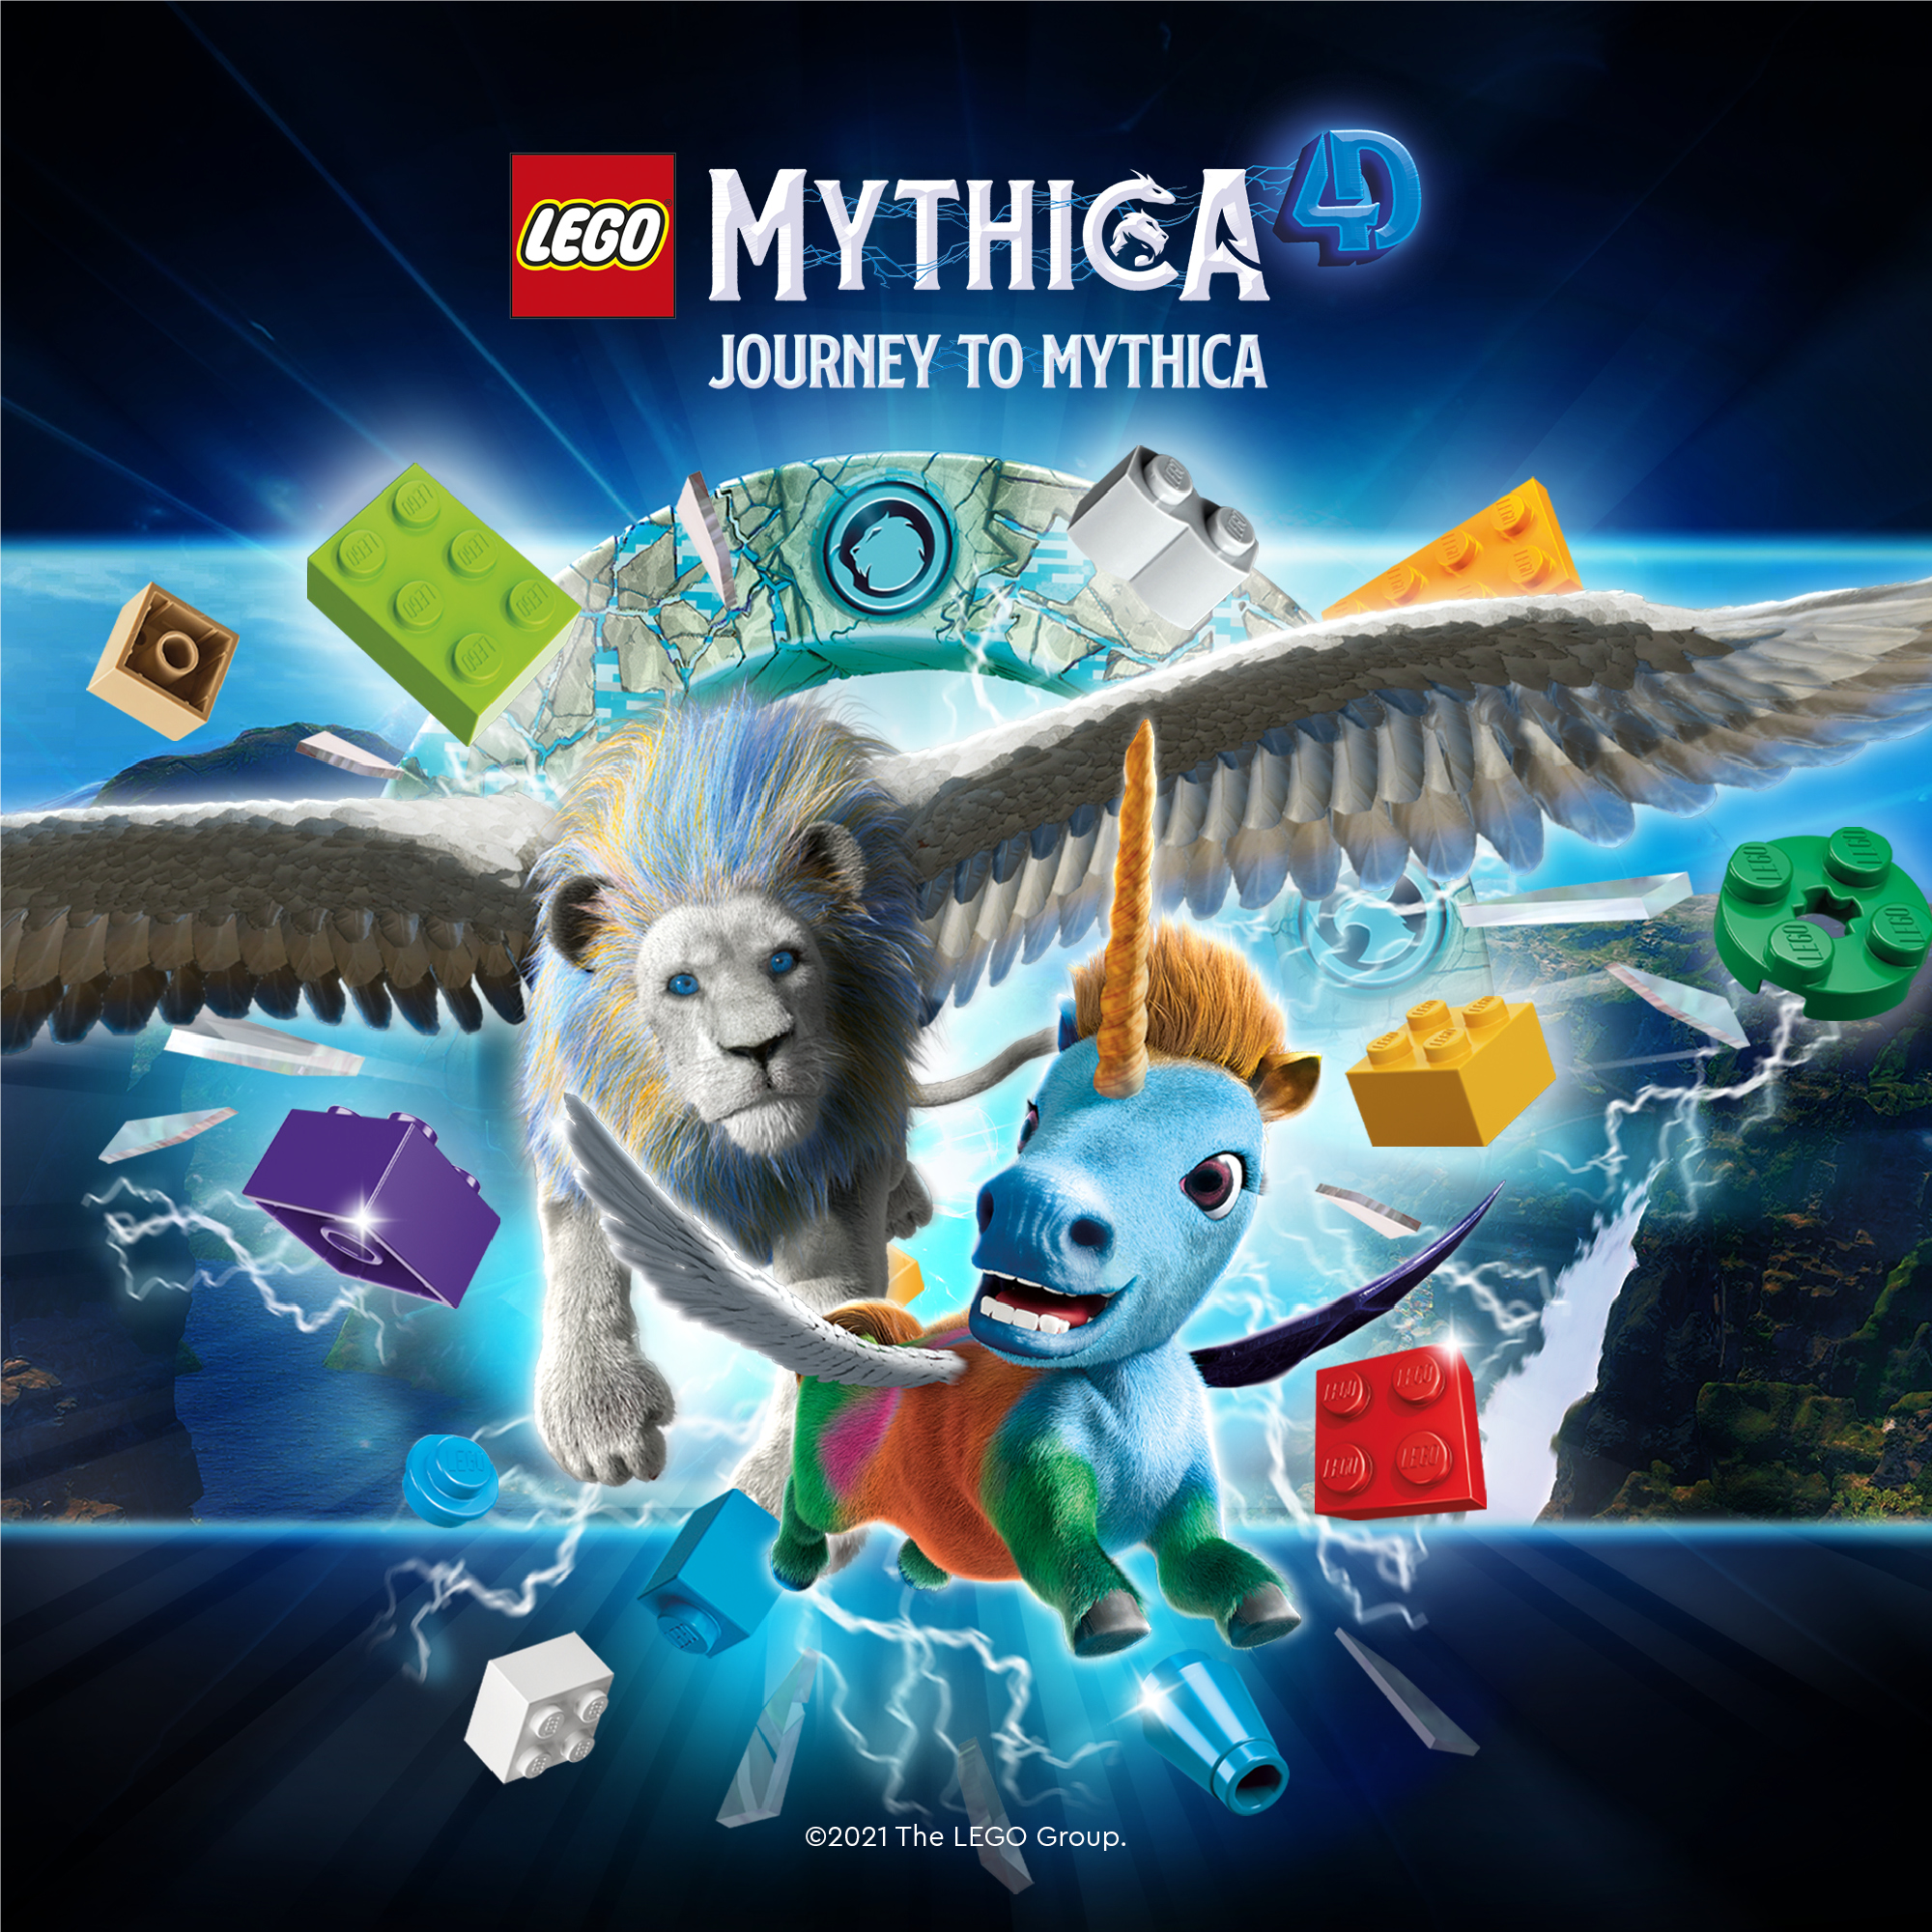 Mythica 4D Movie Image